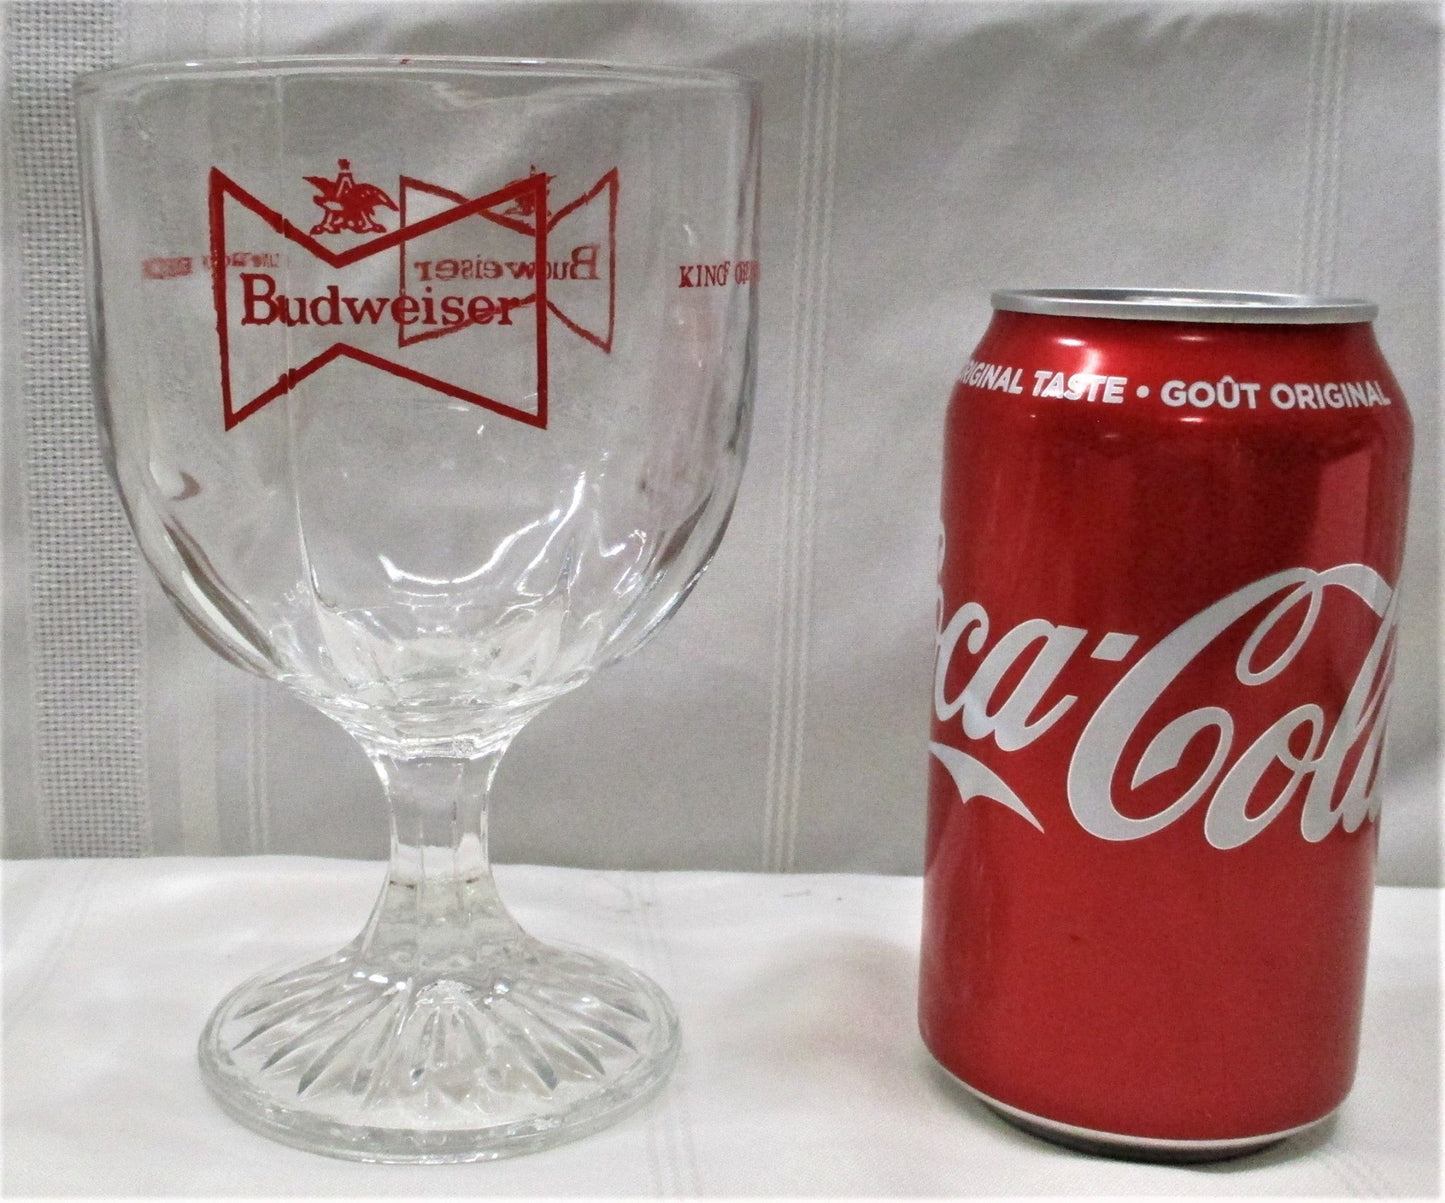 Budweiser King of Beers Pedestal Beer Glass [74685 - Cactus Jax Unique Collectibles